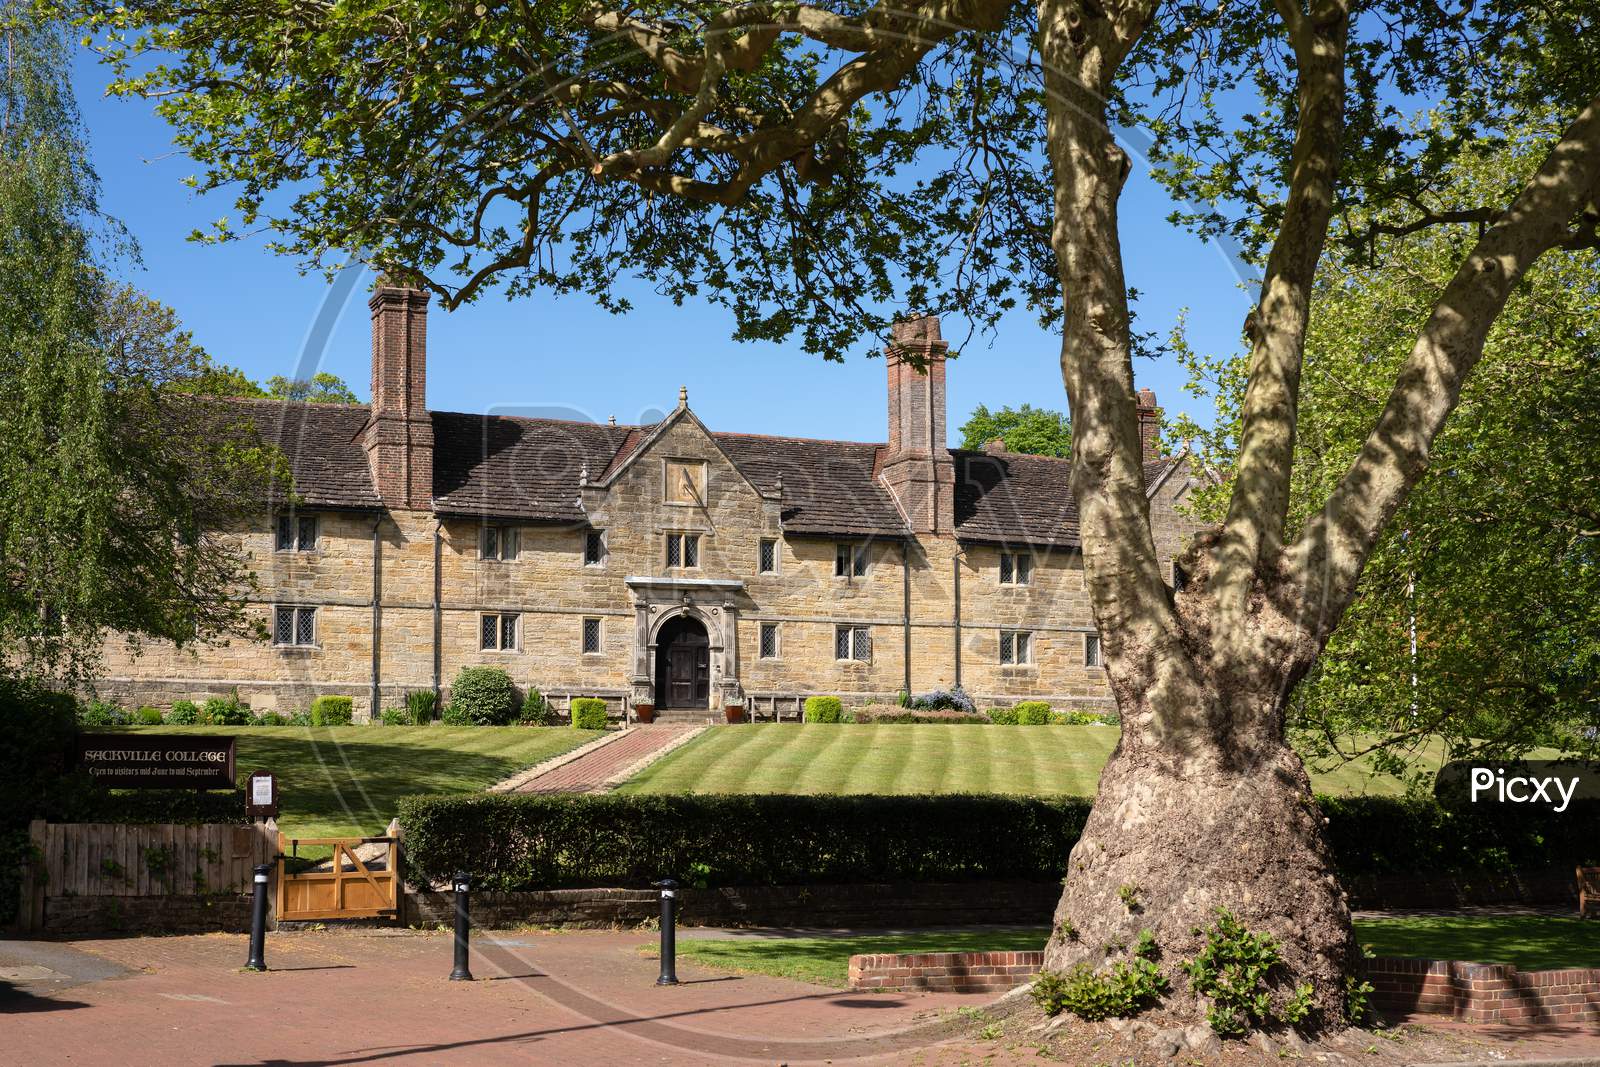 East Grinstead,  West Sussex/Uk - May 5 :  View Of Sackville College East Grinstead West Sussex Onmay 5, 2020